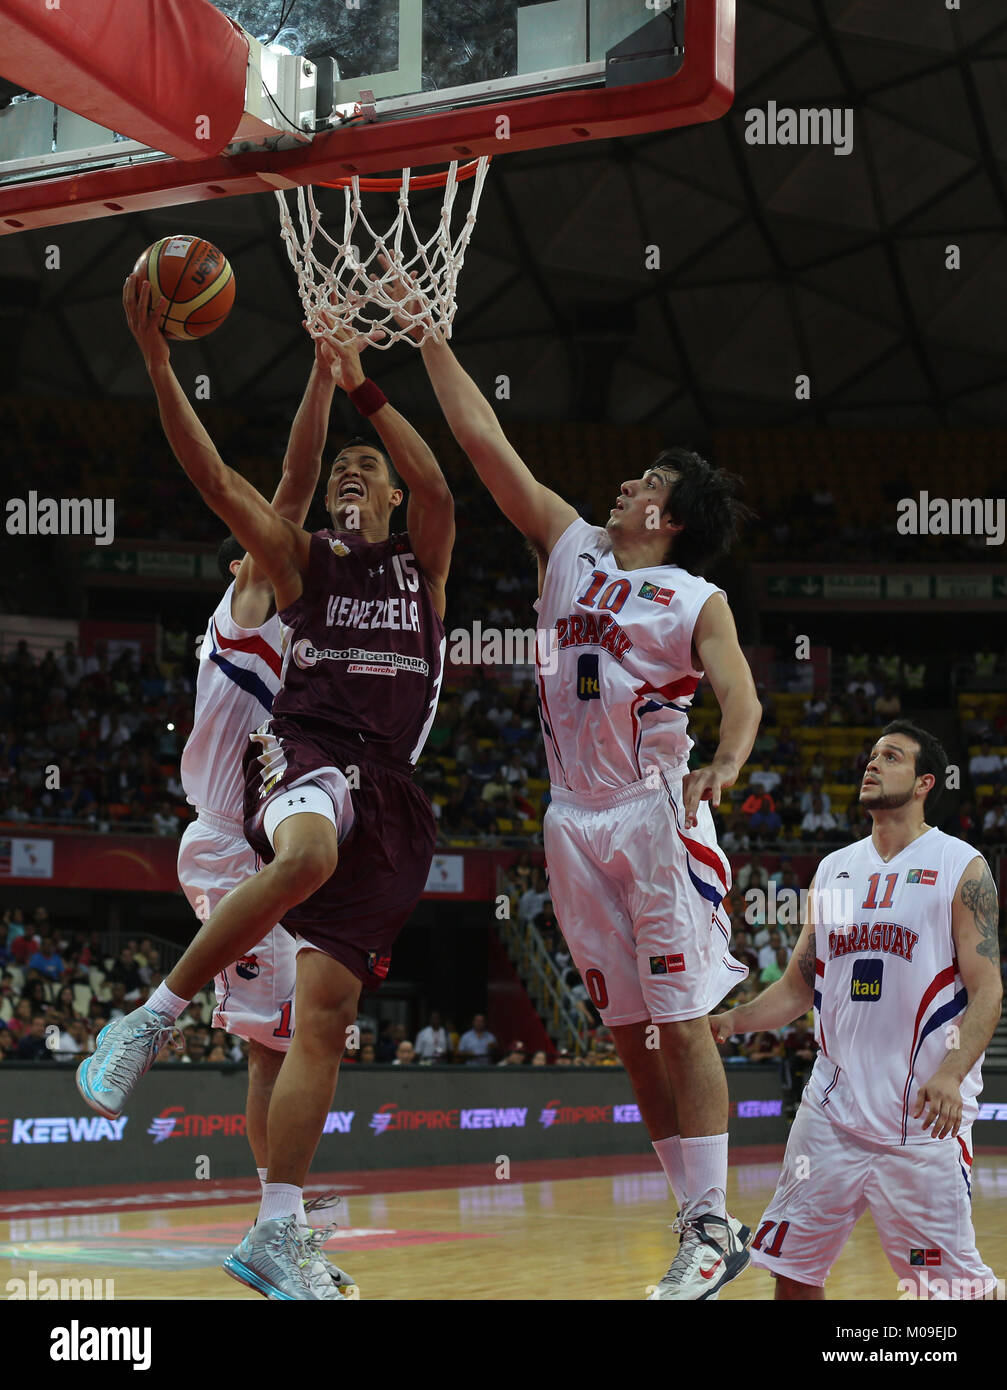 Caracas, Distrito Capital, Venezuela. 31st Aug, 2013. August 31, 2013.Windi Graterol (c), from Venezuela, tries to score against Alejandro Peralta (d) and Federico Mellone (i), from Paraguay, during the match of the first phase of the FIBA Americas Basketball pre World Cup 2013, in Caracas, Venezuela. Photo: Juan Carlos Hernandez Credit: Juan Carlos Hernandez/ZUMA Wire/Alamy Live News Stock Photo